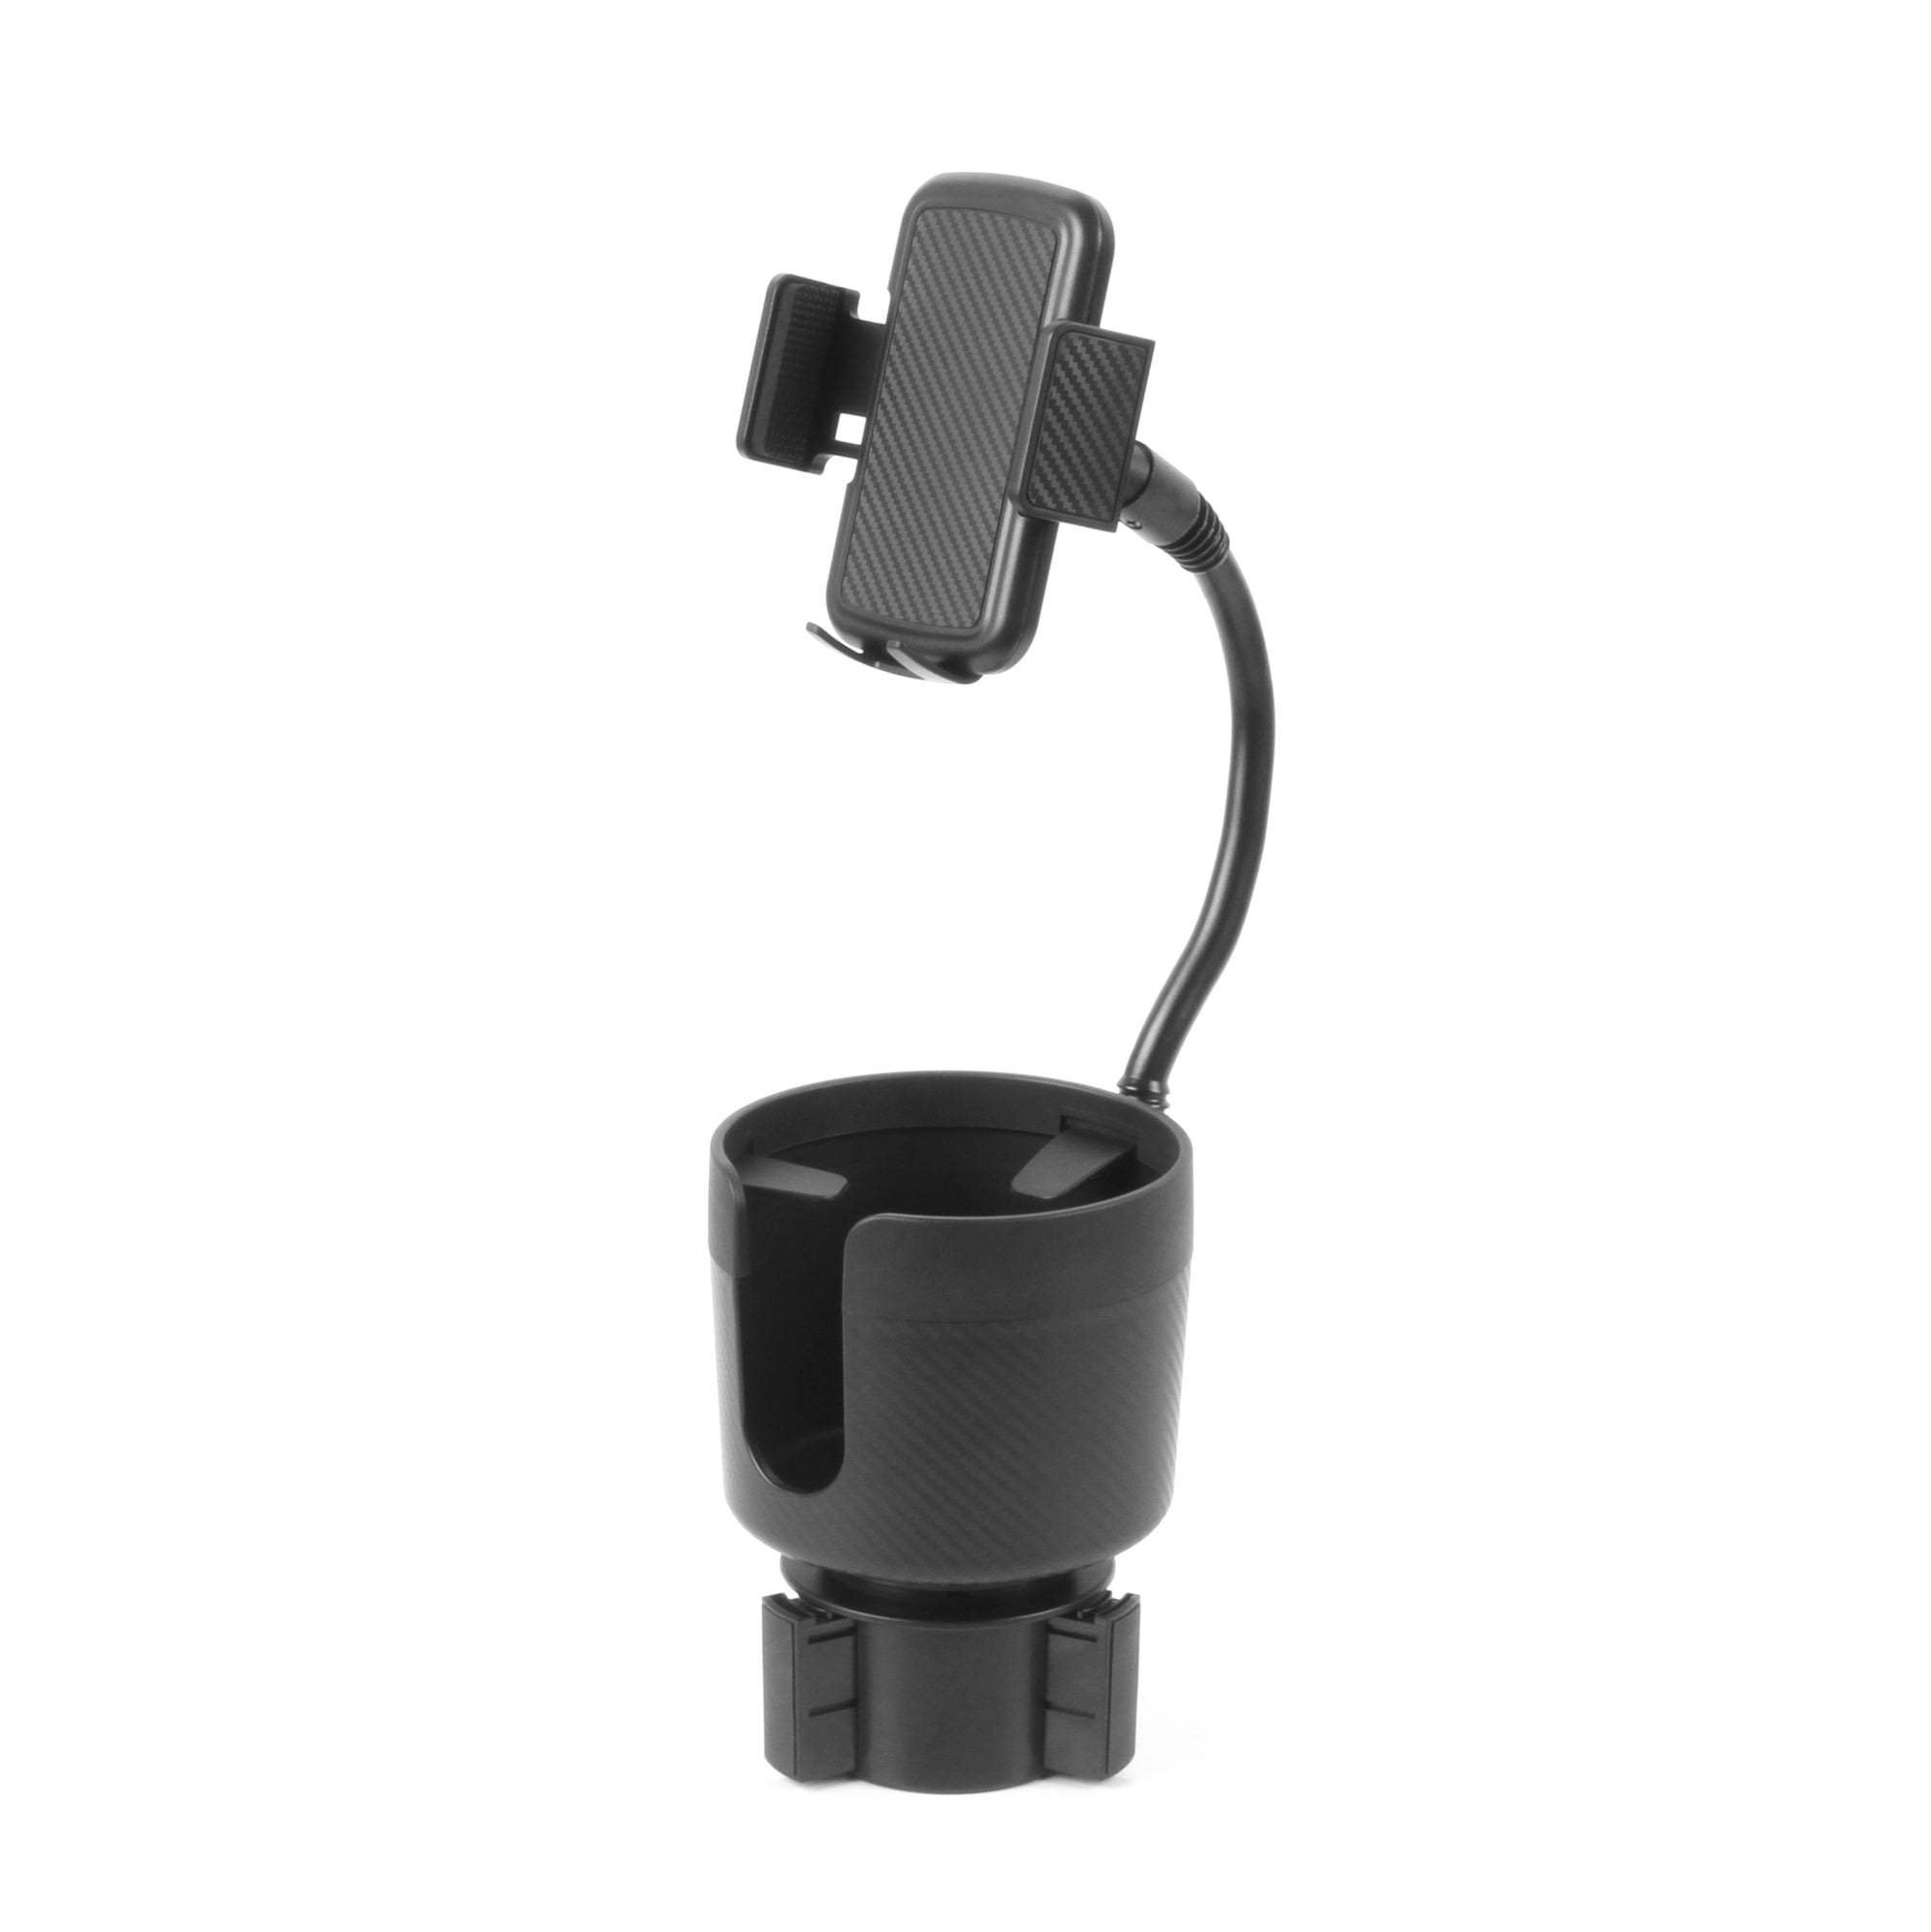  CAVIANA Dual Phone Holder for Car Cup Holder – Long